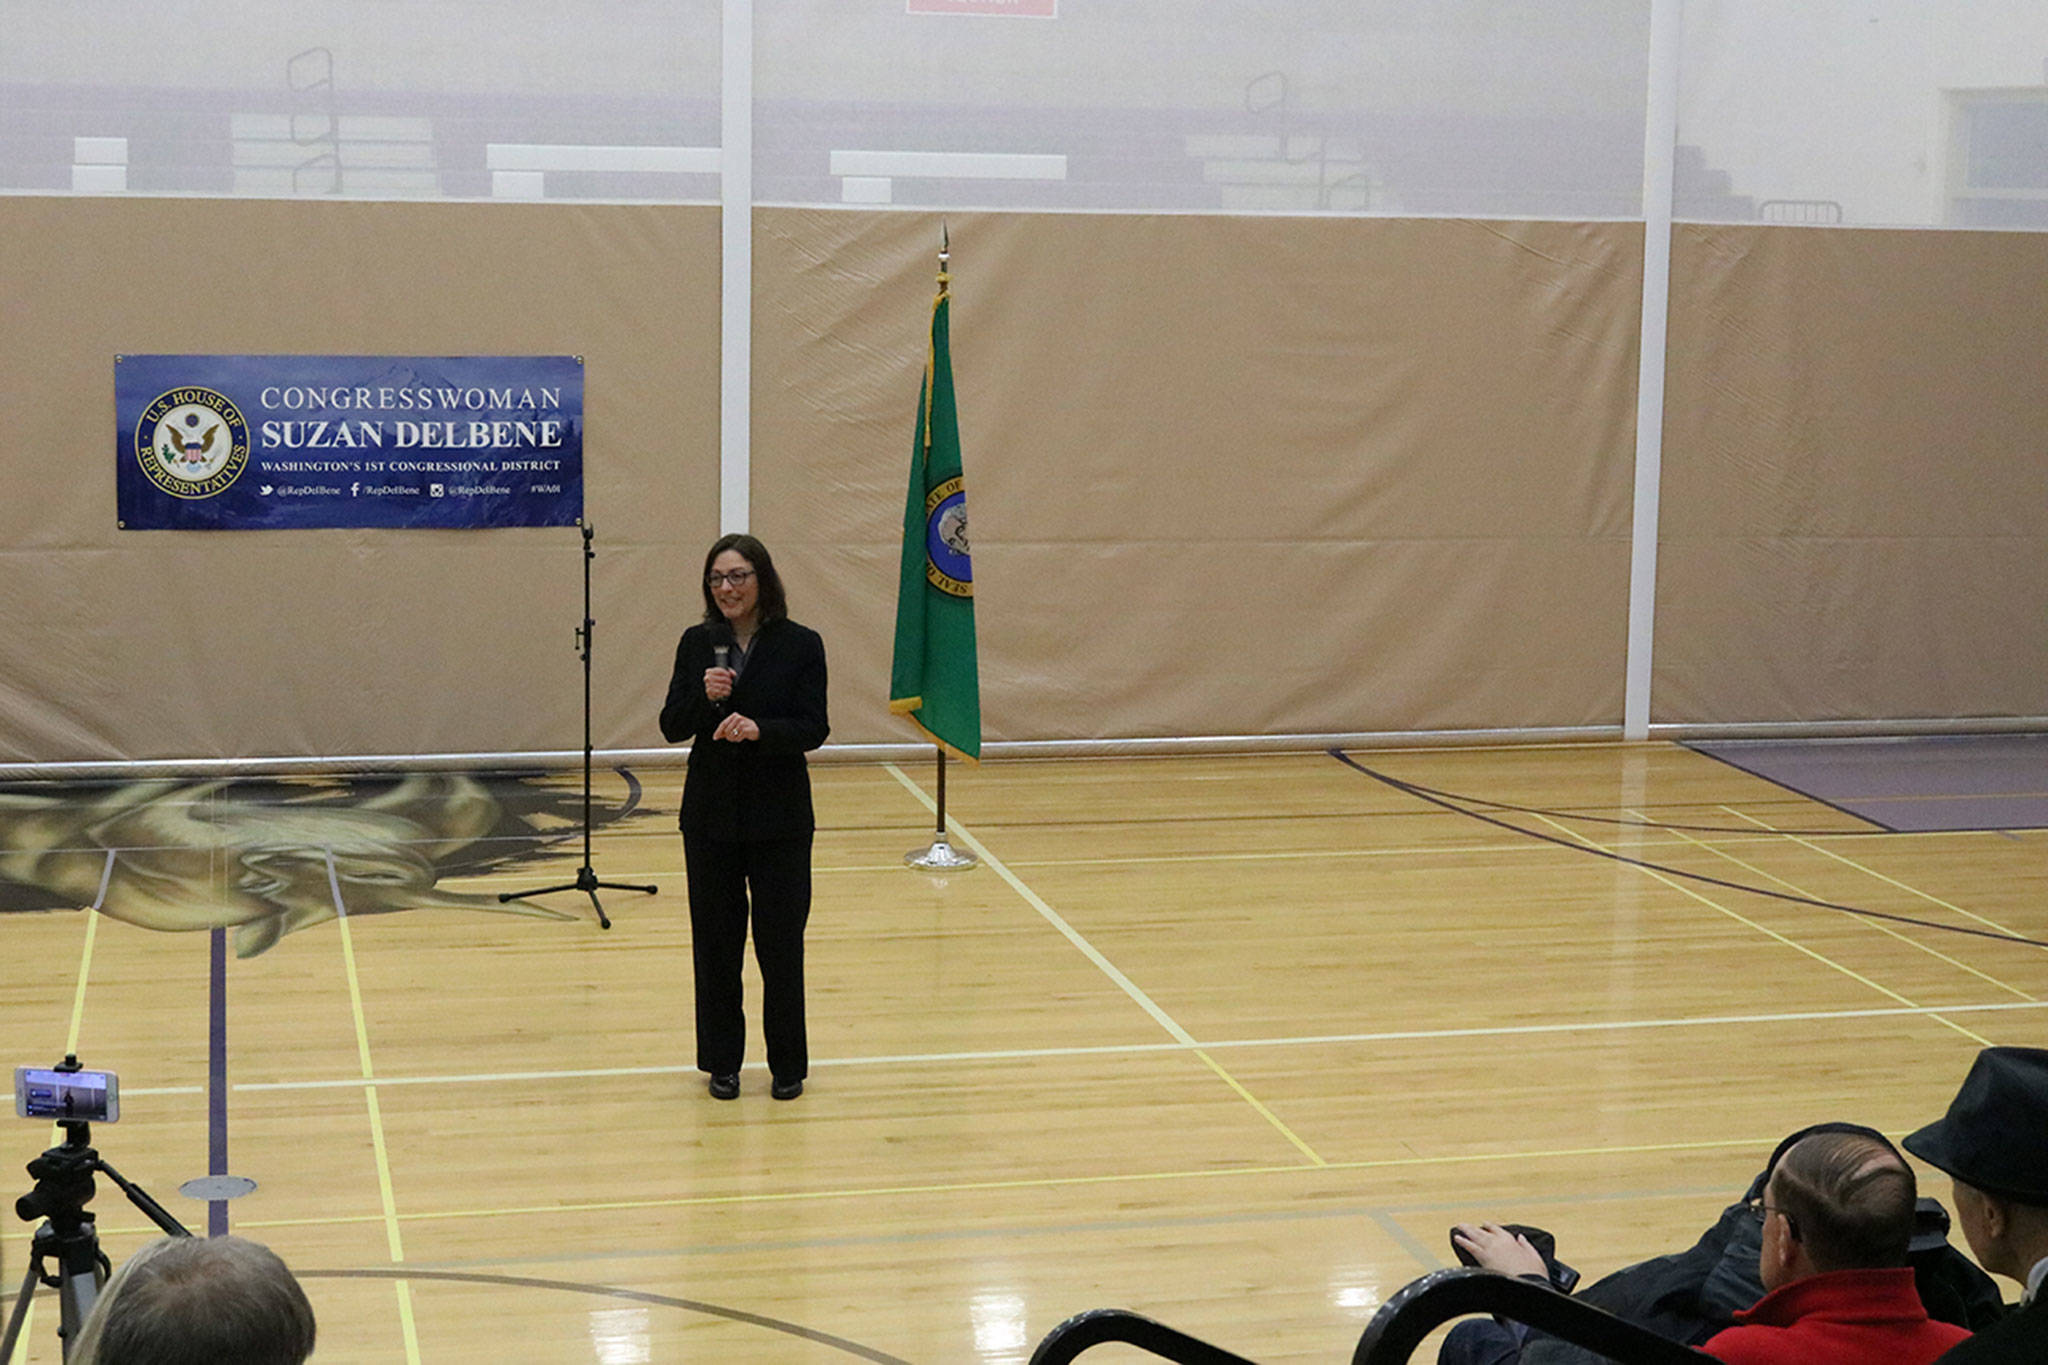 Congresswoman Suzan DelBene fields questions from the audience during a town hall event at Lake Washington High School in Kirkland. CATHERINE KRUMMEY / Kirkland Reporter